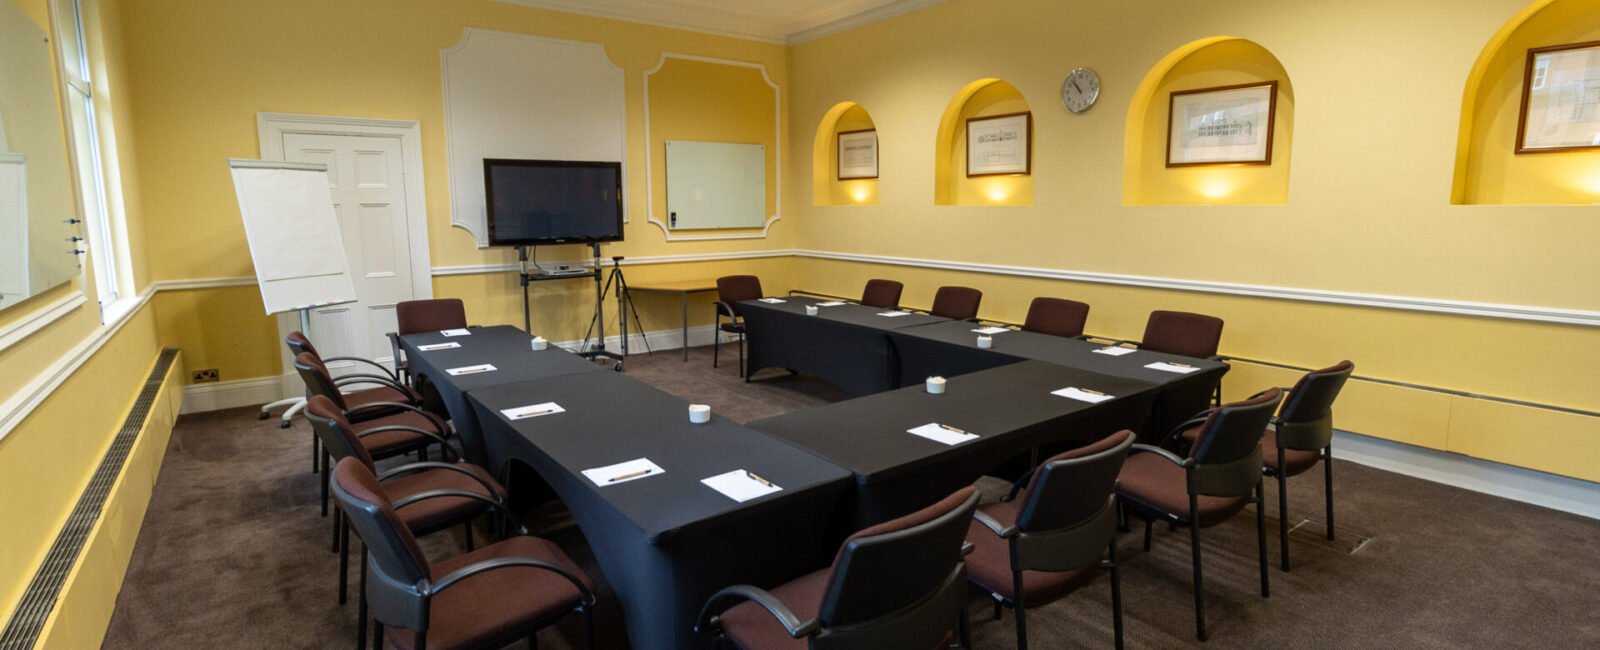 The Hodgson conference room, laid out as a U-shape boardroom to accommodate up to 14 people.